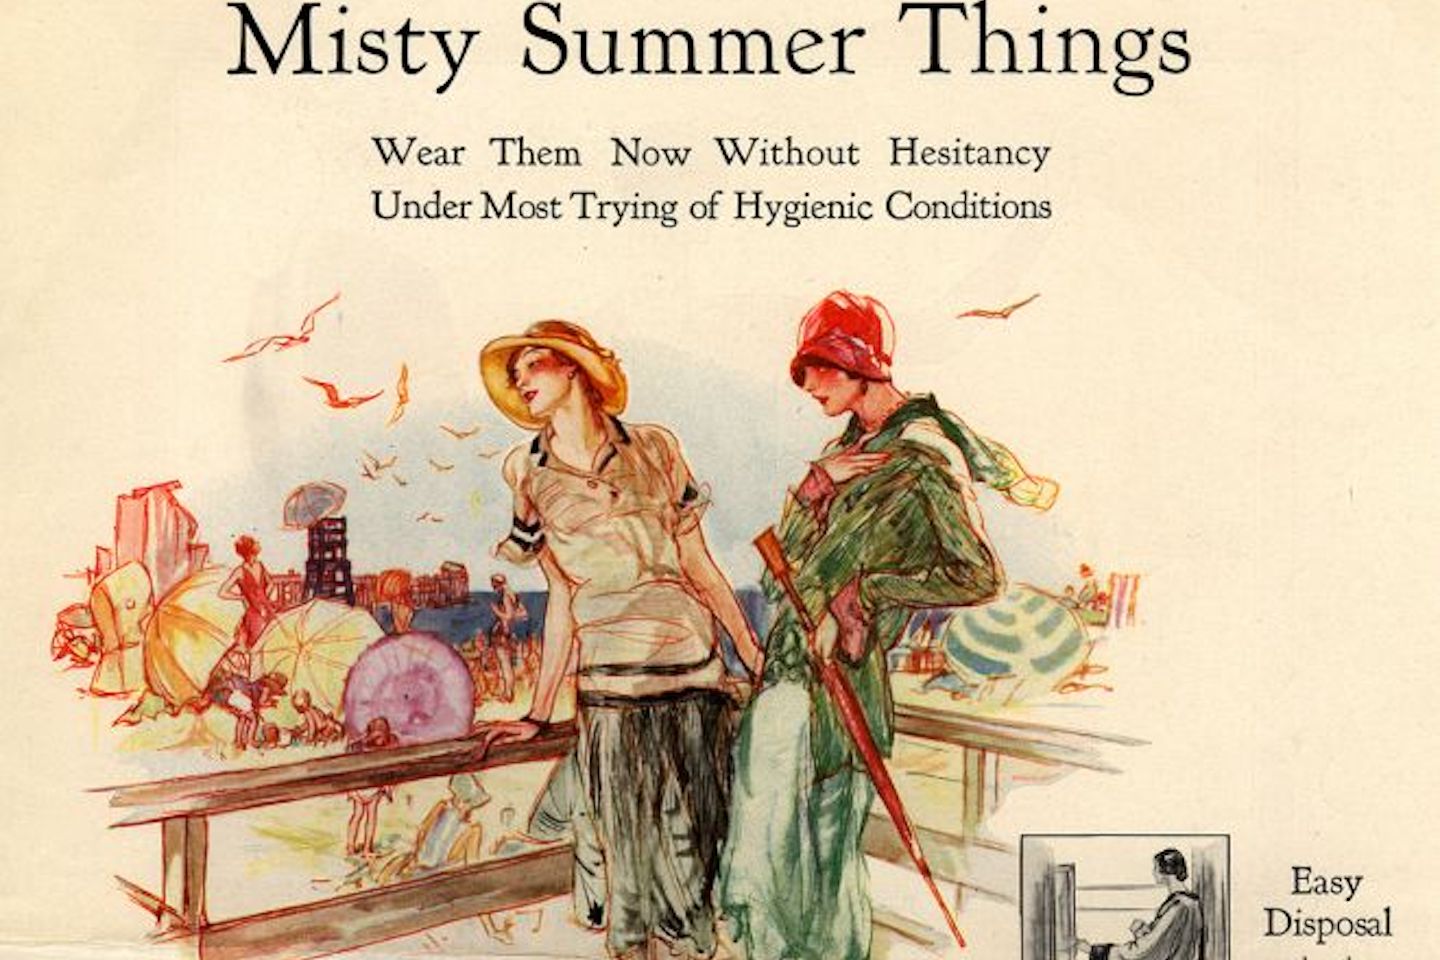 Part of a vintage advertisement featuring two women standing on a boardwalk in front of a beach. The headline reads, "Misty Summer Things" and below it in smaller text, "Wear Them Now Without Hesitancy Under Most Trying of Hygienic Conditions"